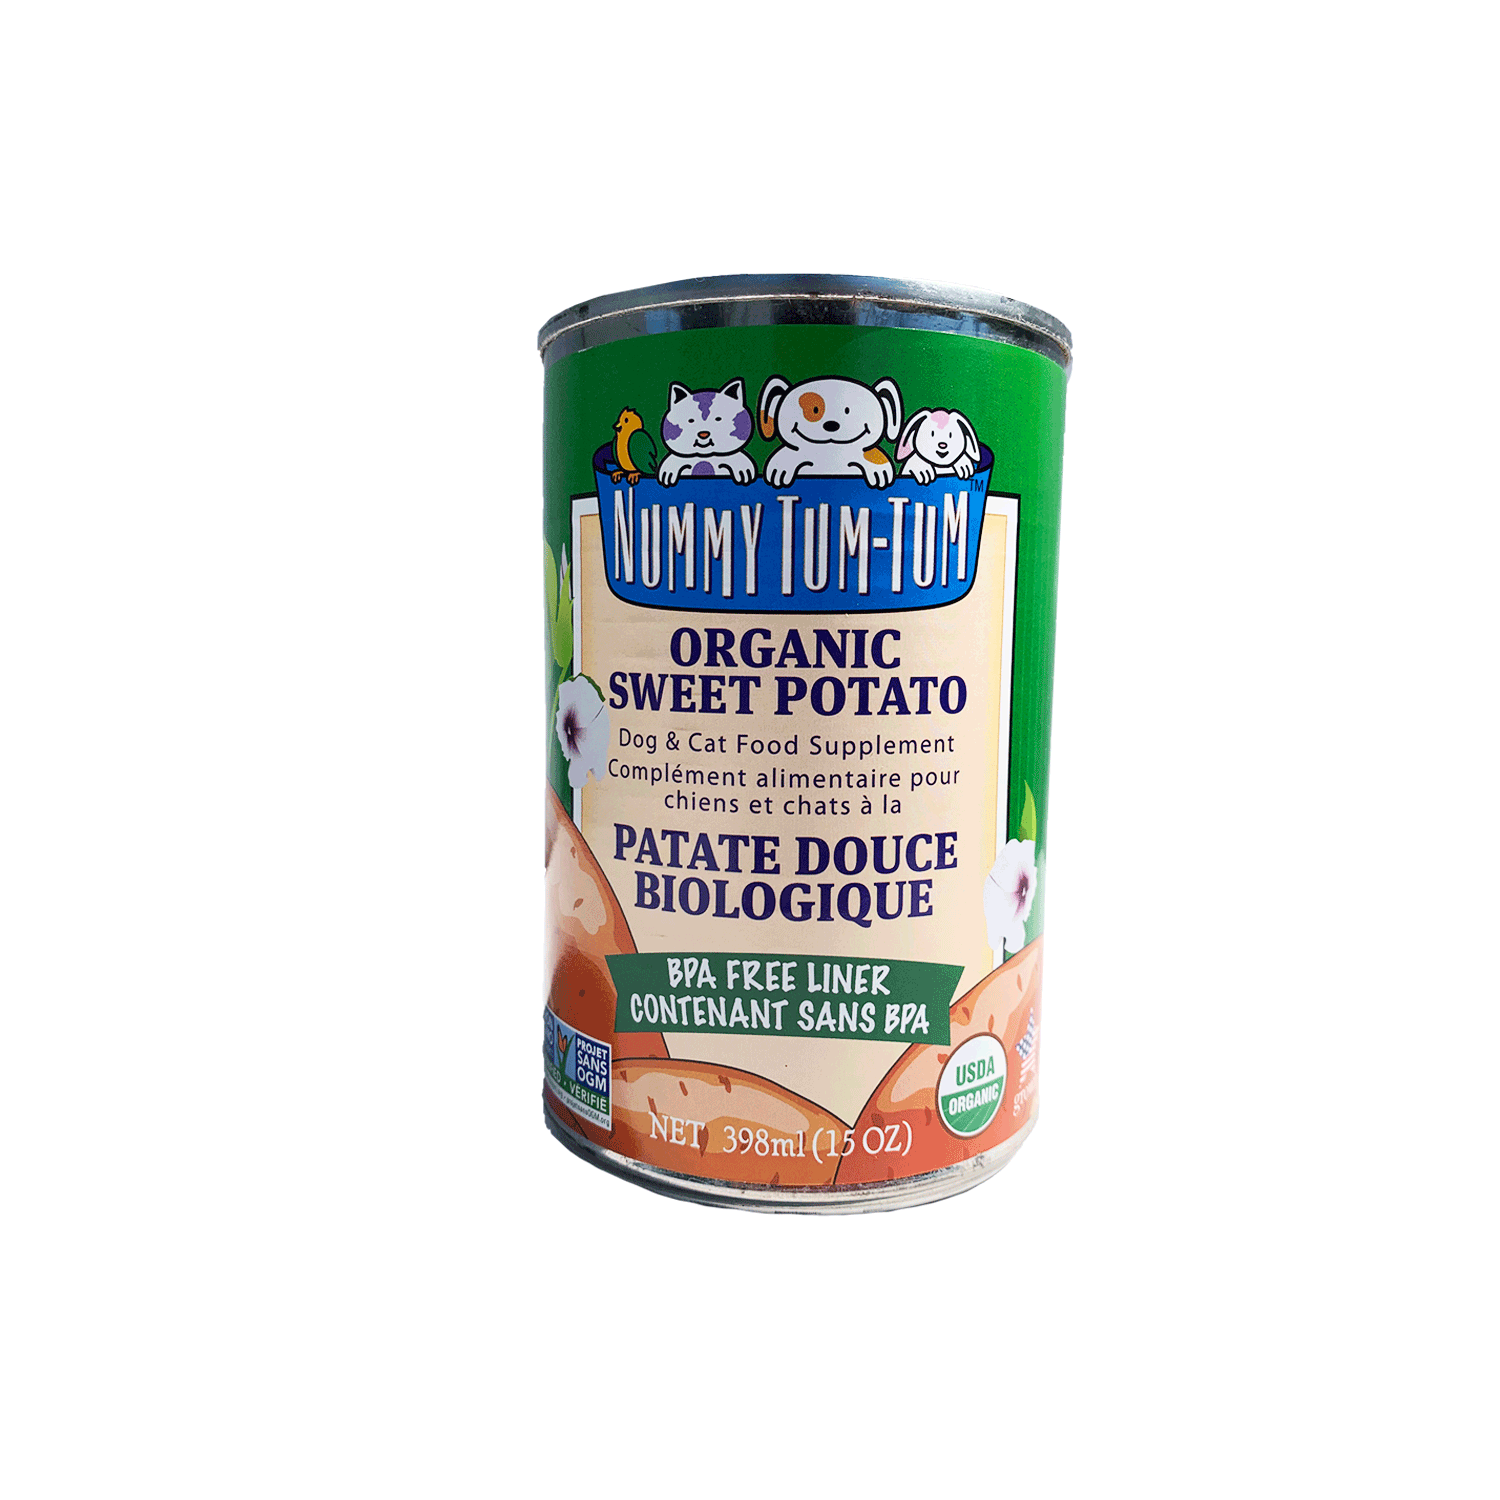 Nummy Tum Tum Moist Food for Dogs and Cats - Organic Sweet Potato